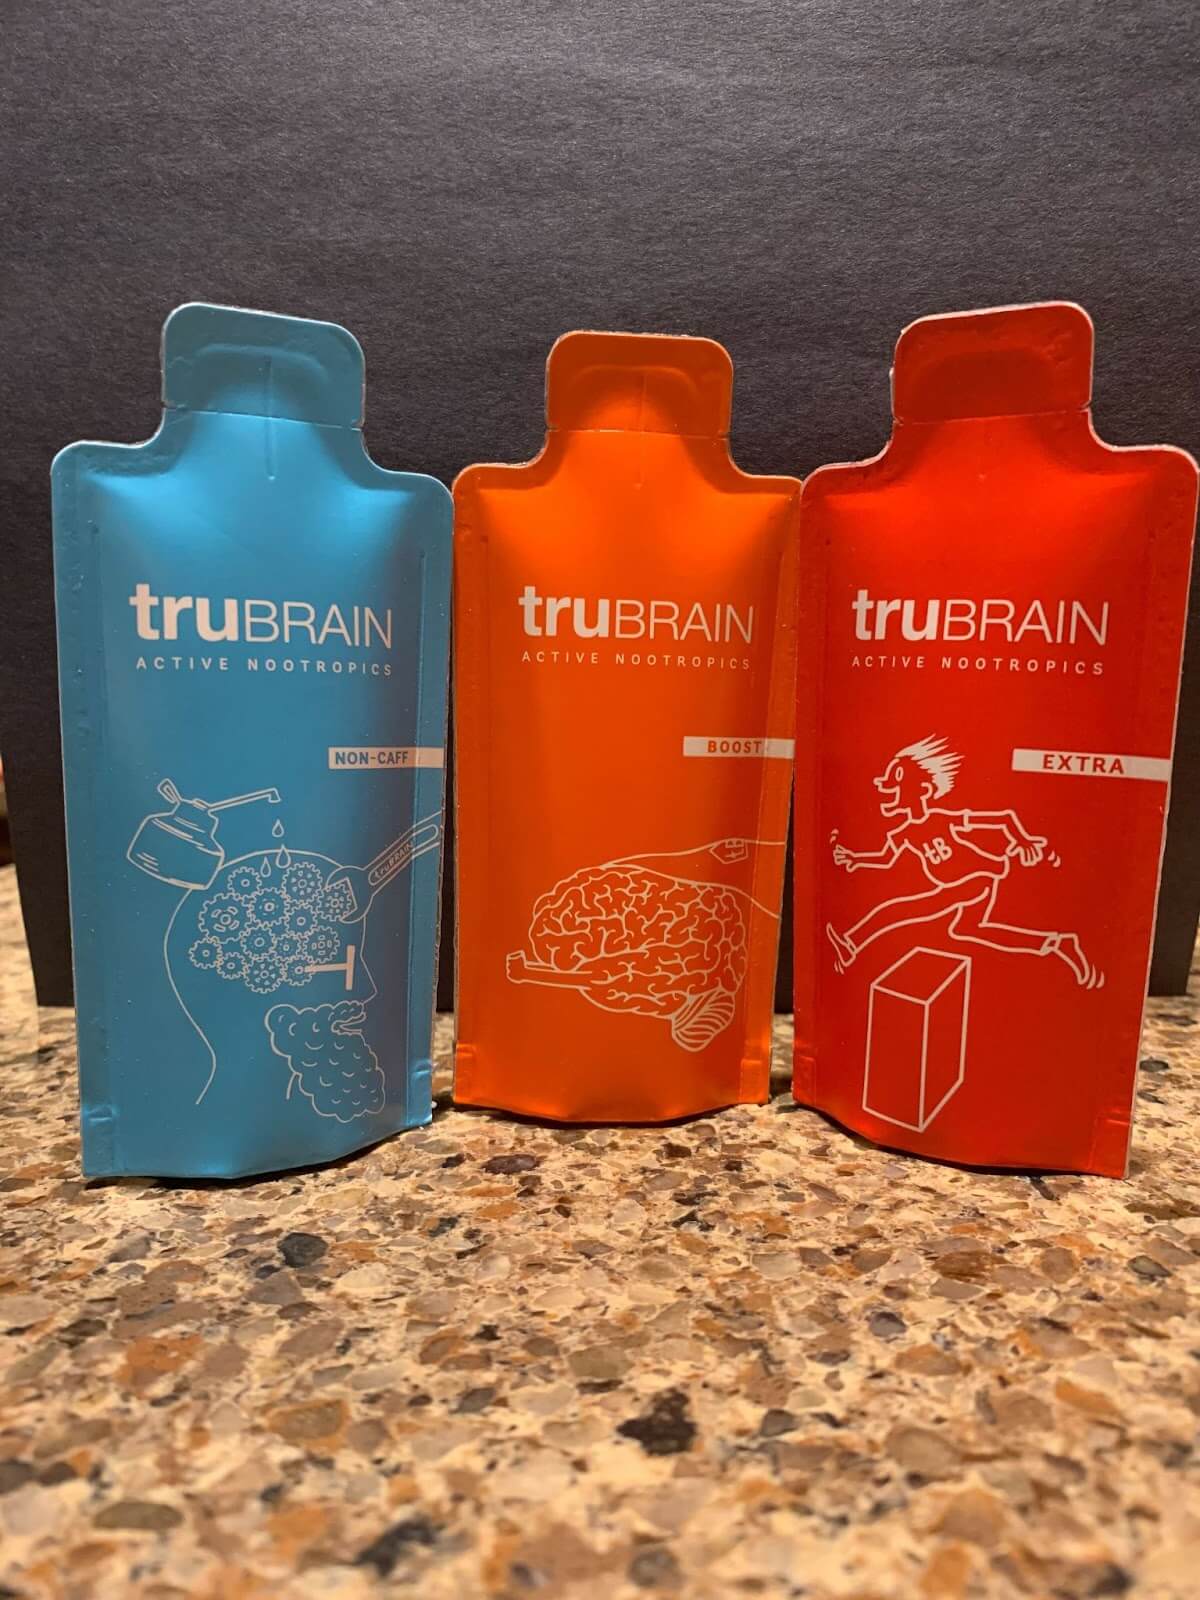 TruBrain Non-Caff, Boost, and Extra